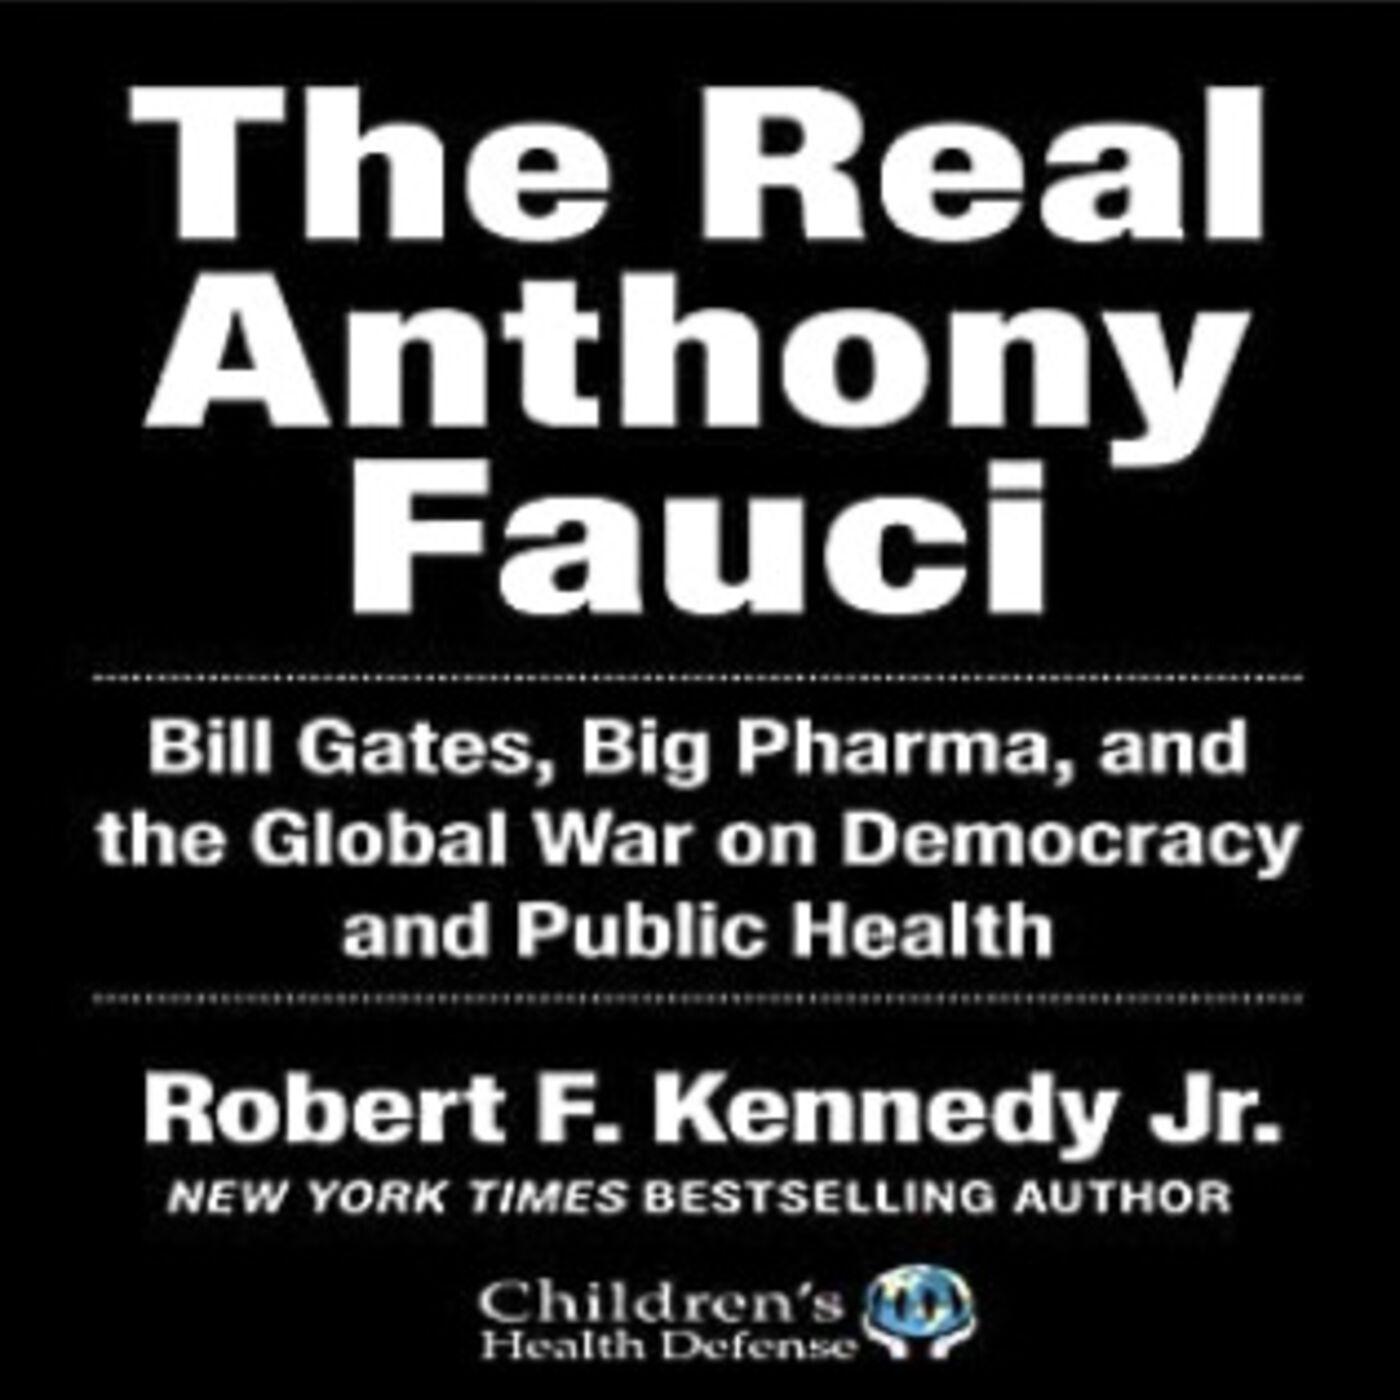 Robert F. Kennedy Jr. about the Real Anthony Fauci